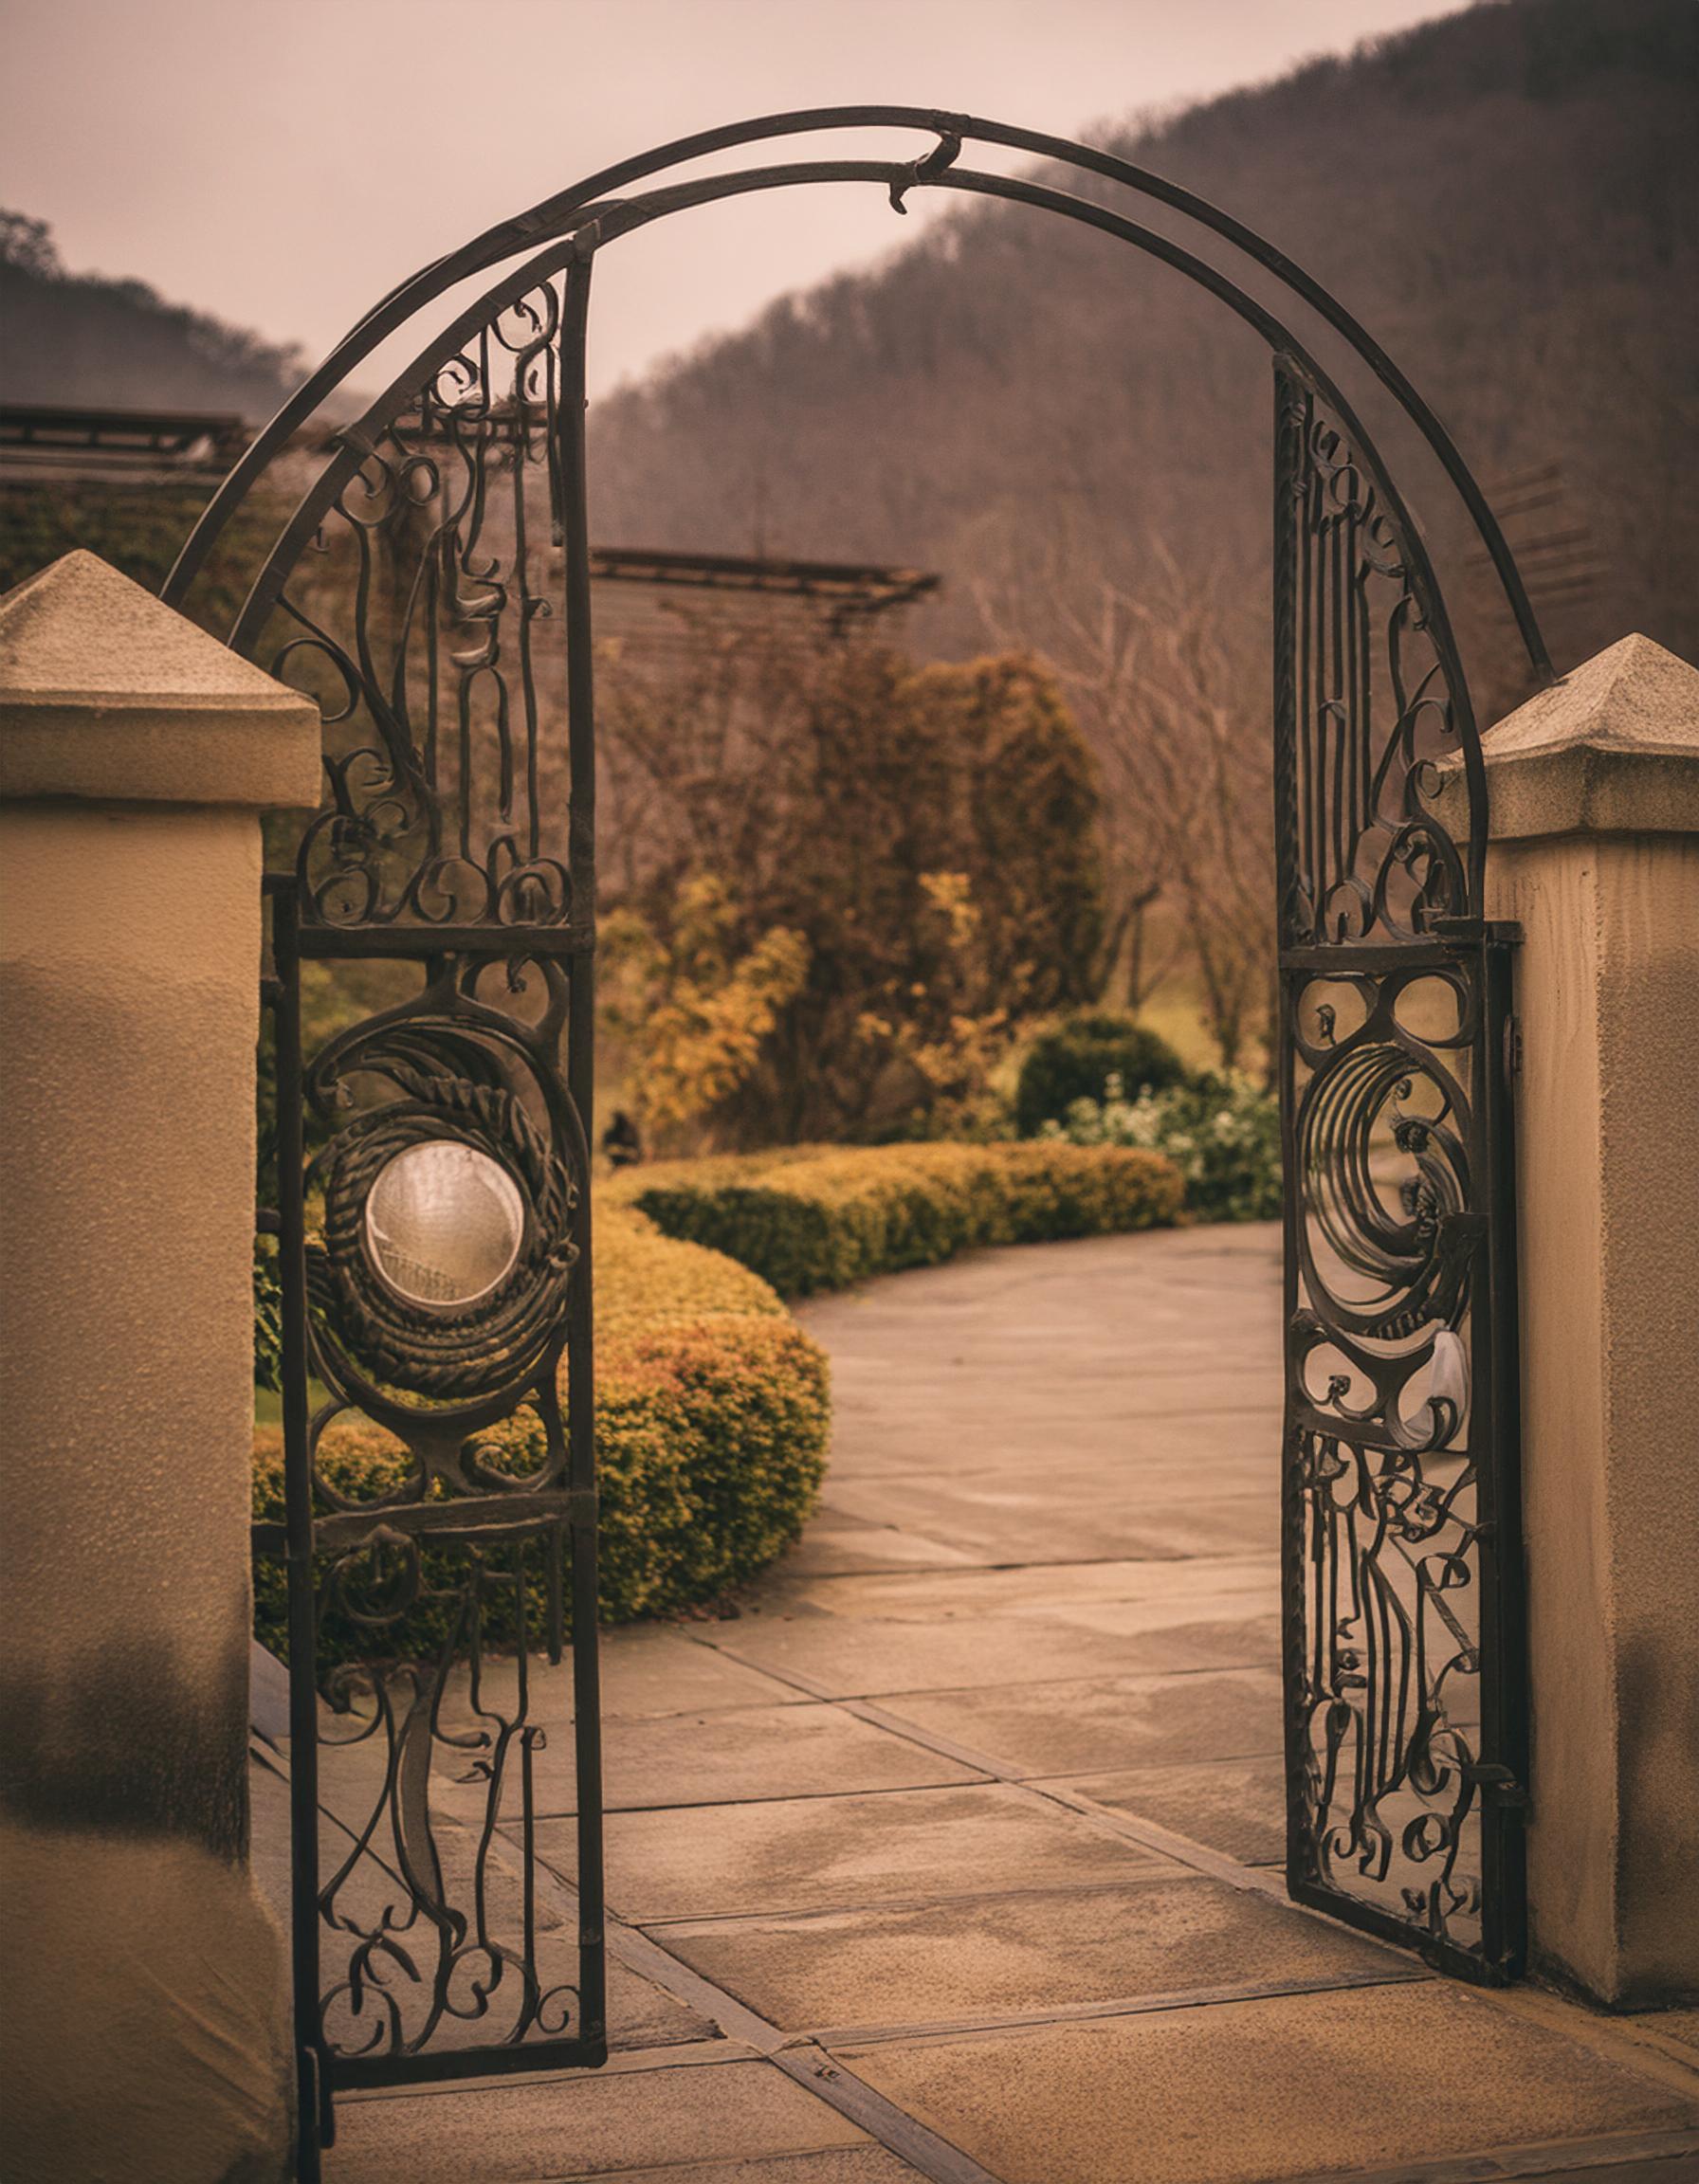 Firefly Create an outdoor scene showcasing custom iron gates, fences, and a firepit by Appalachian I(8)